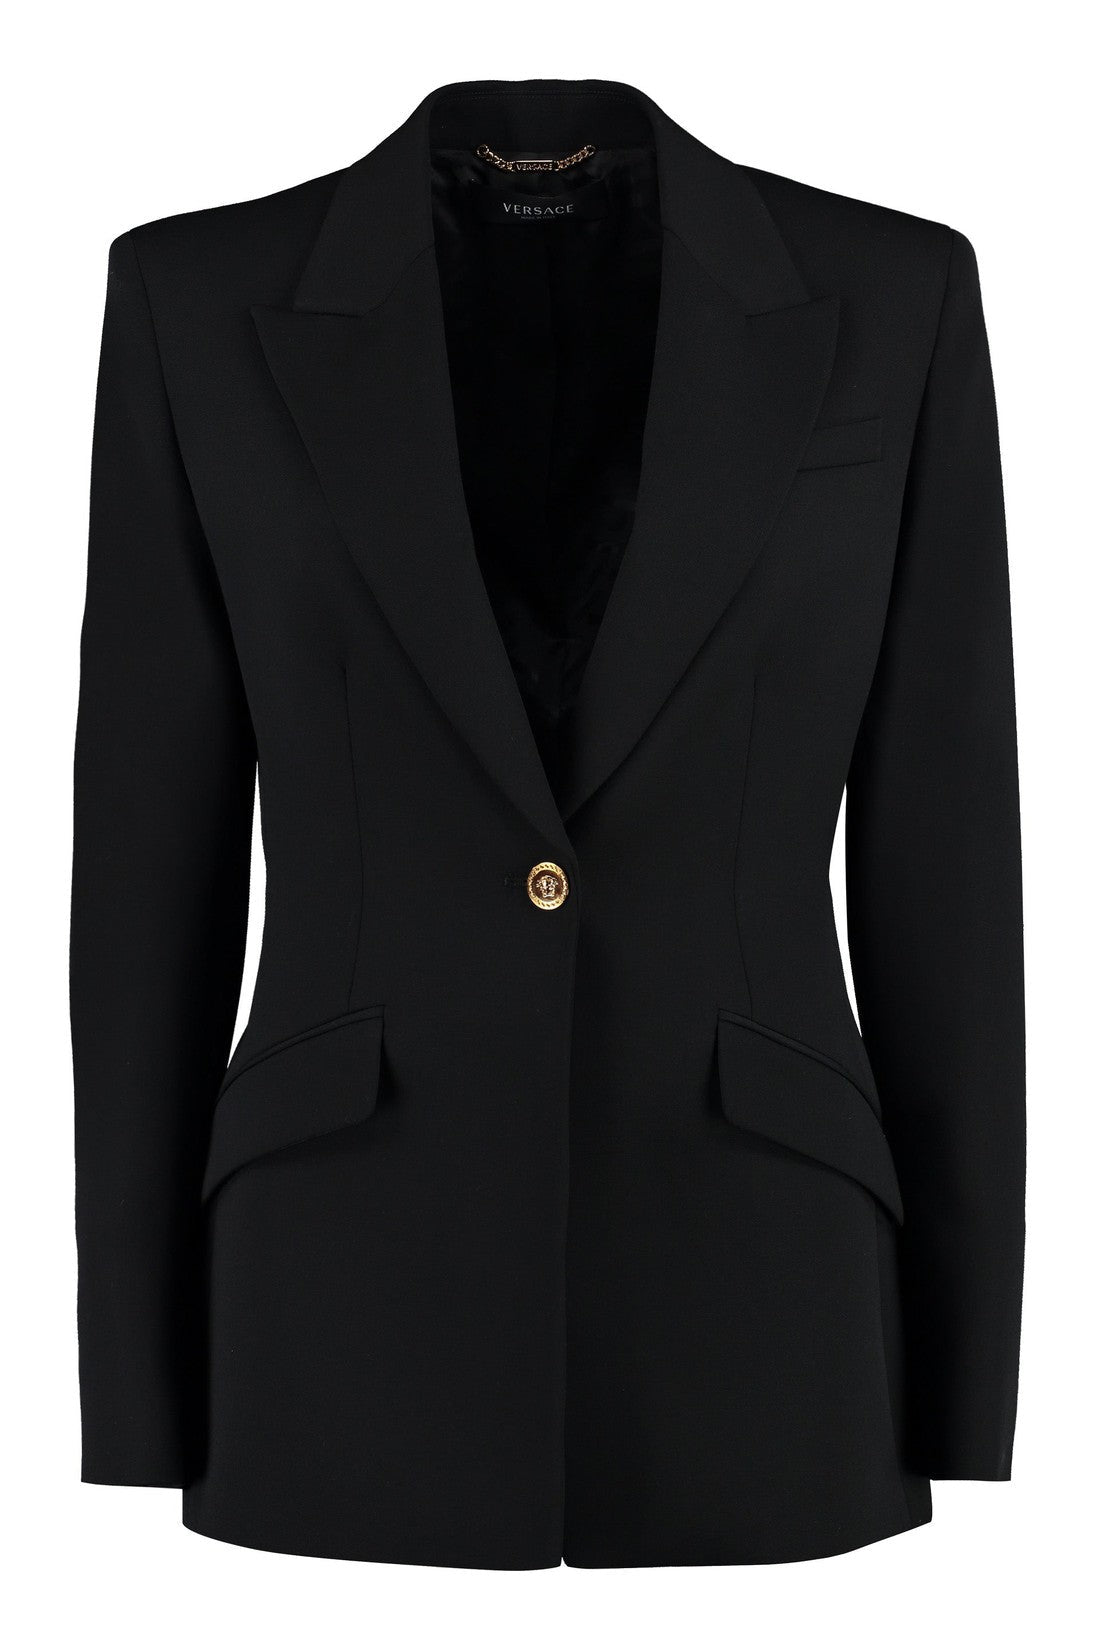 Versace-OUTLET-SALE-Wool single-breasted blazer-ARCHIVIST